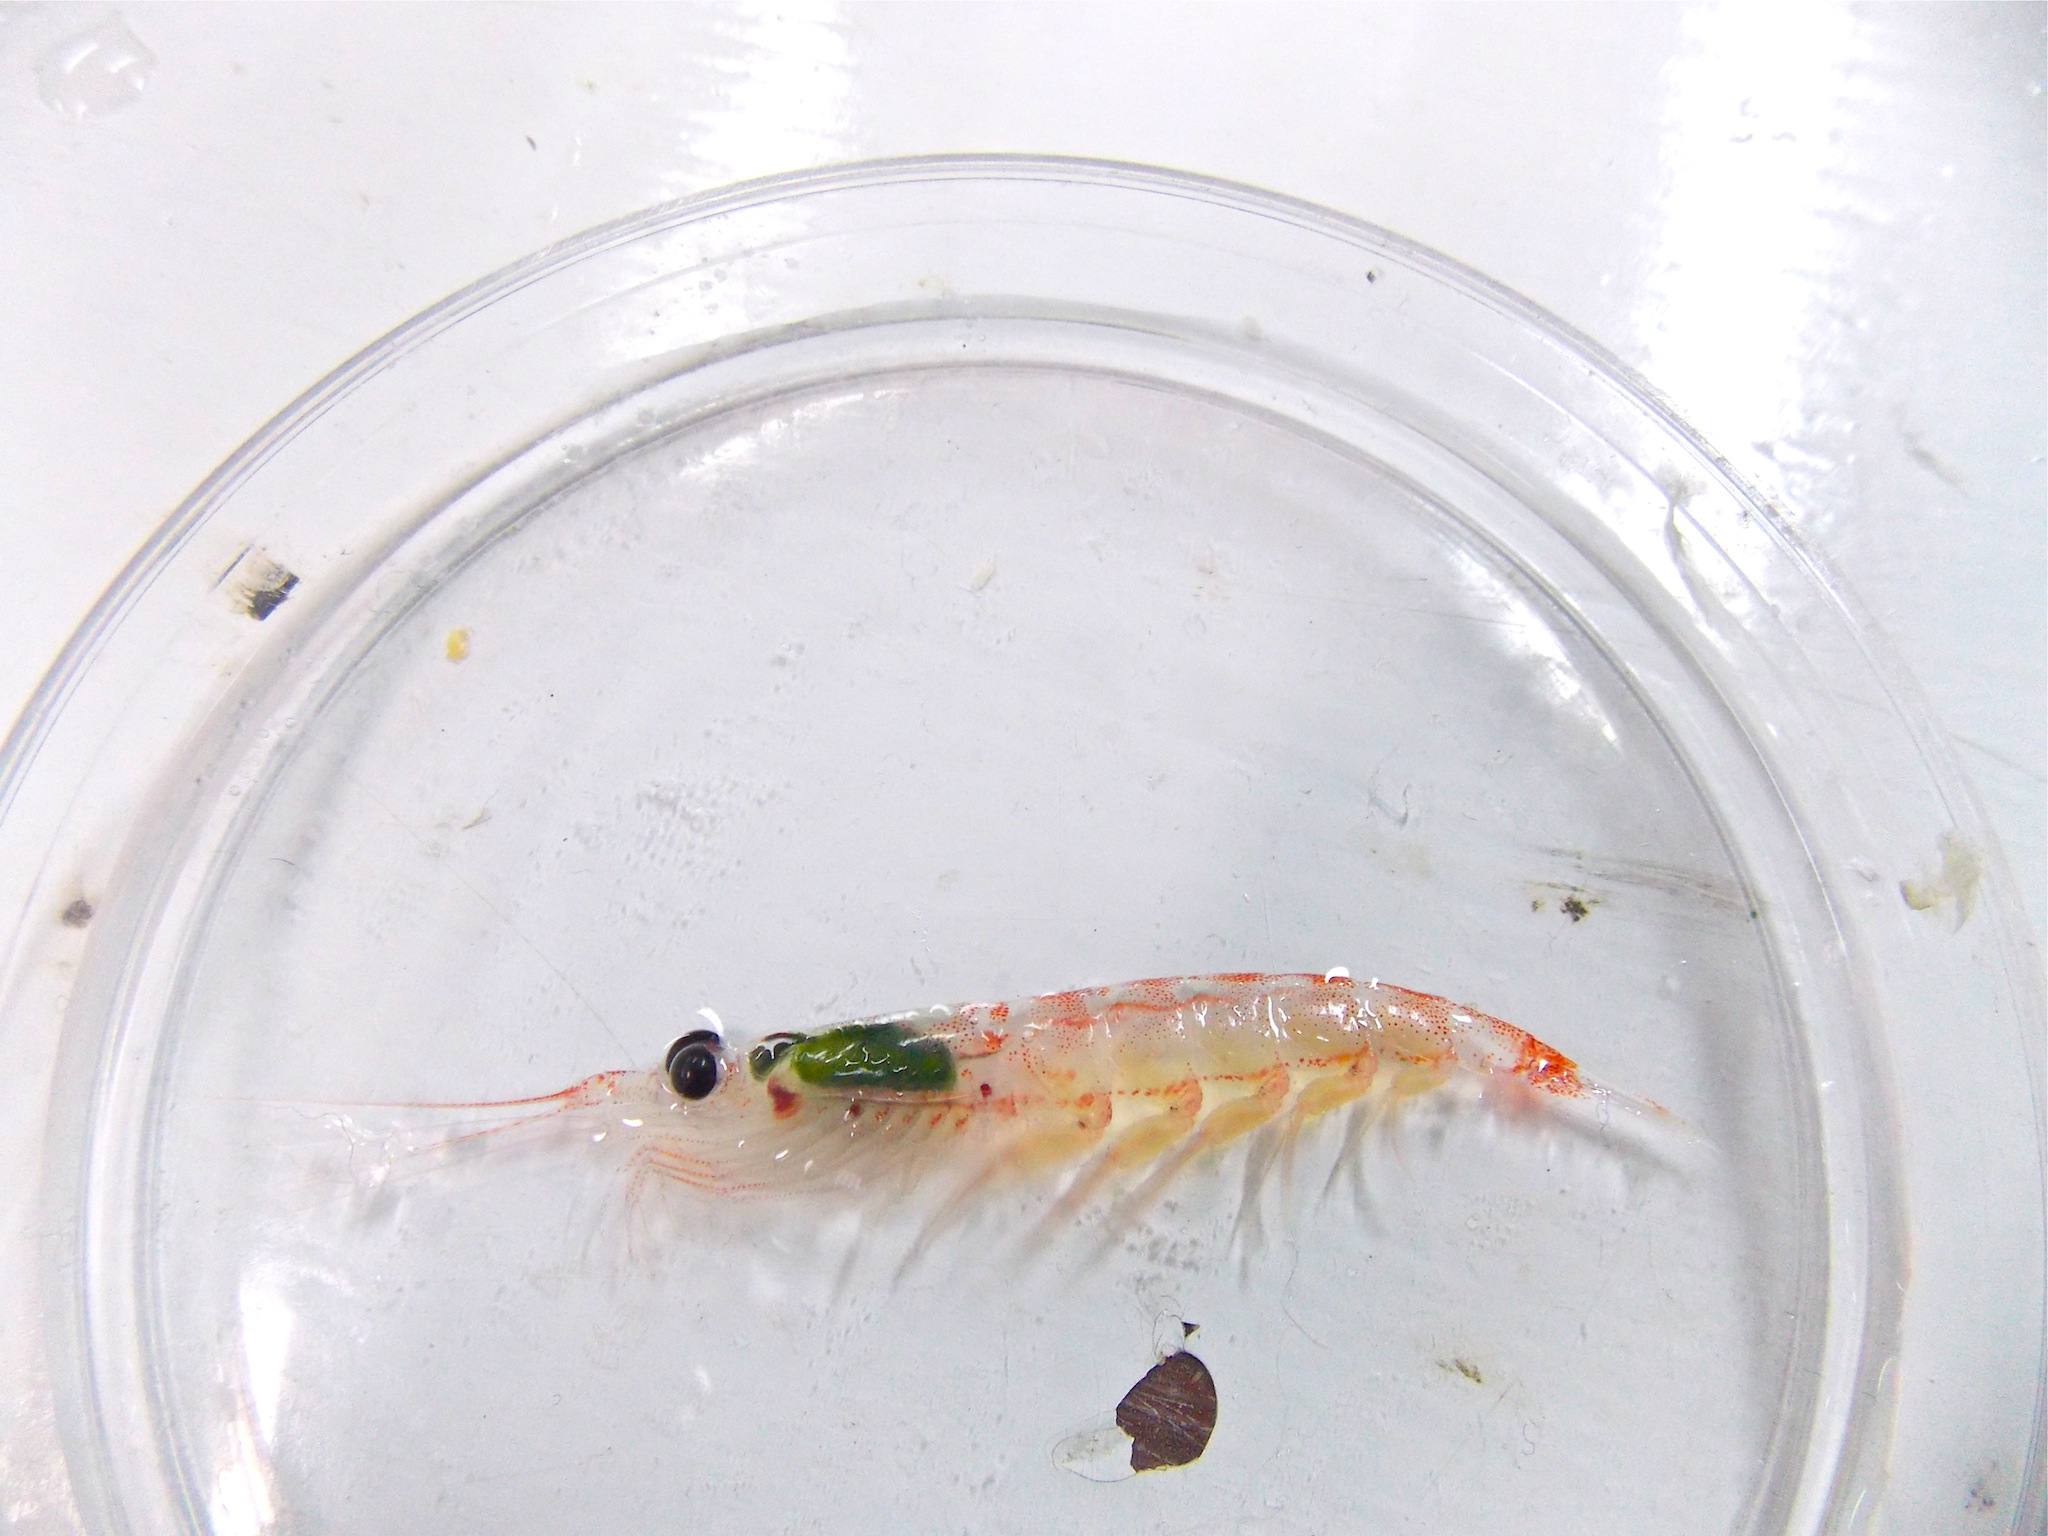 Euphausia superba: also known as Antarctic krill, these were more than 2 inches in length, also notice the phytoplankon in stomach.